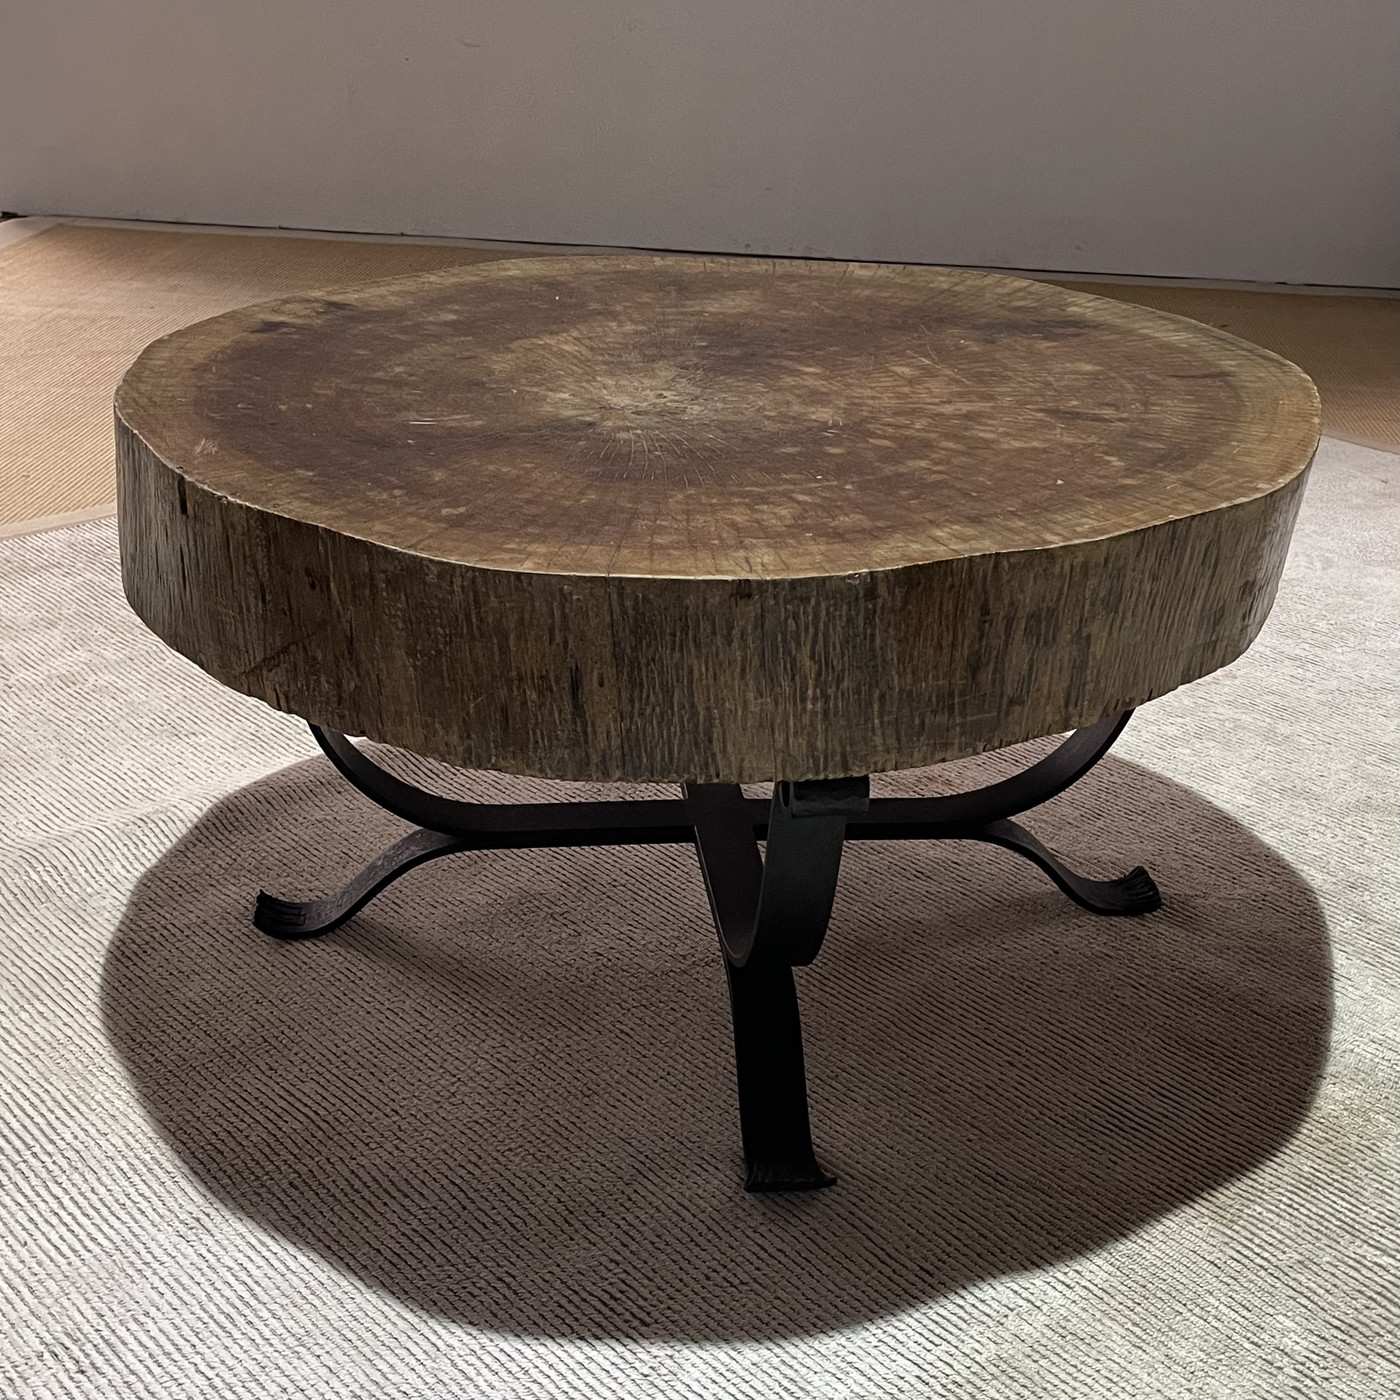 Coffee table with wooden top from the Albizia Saman tree